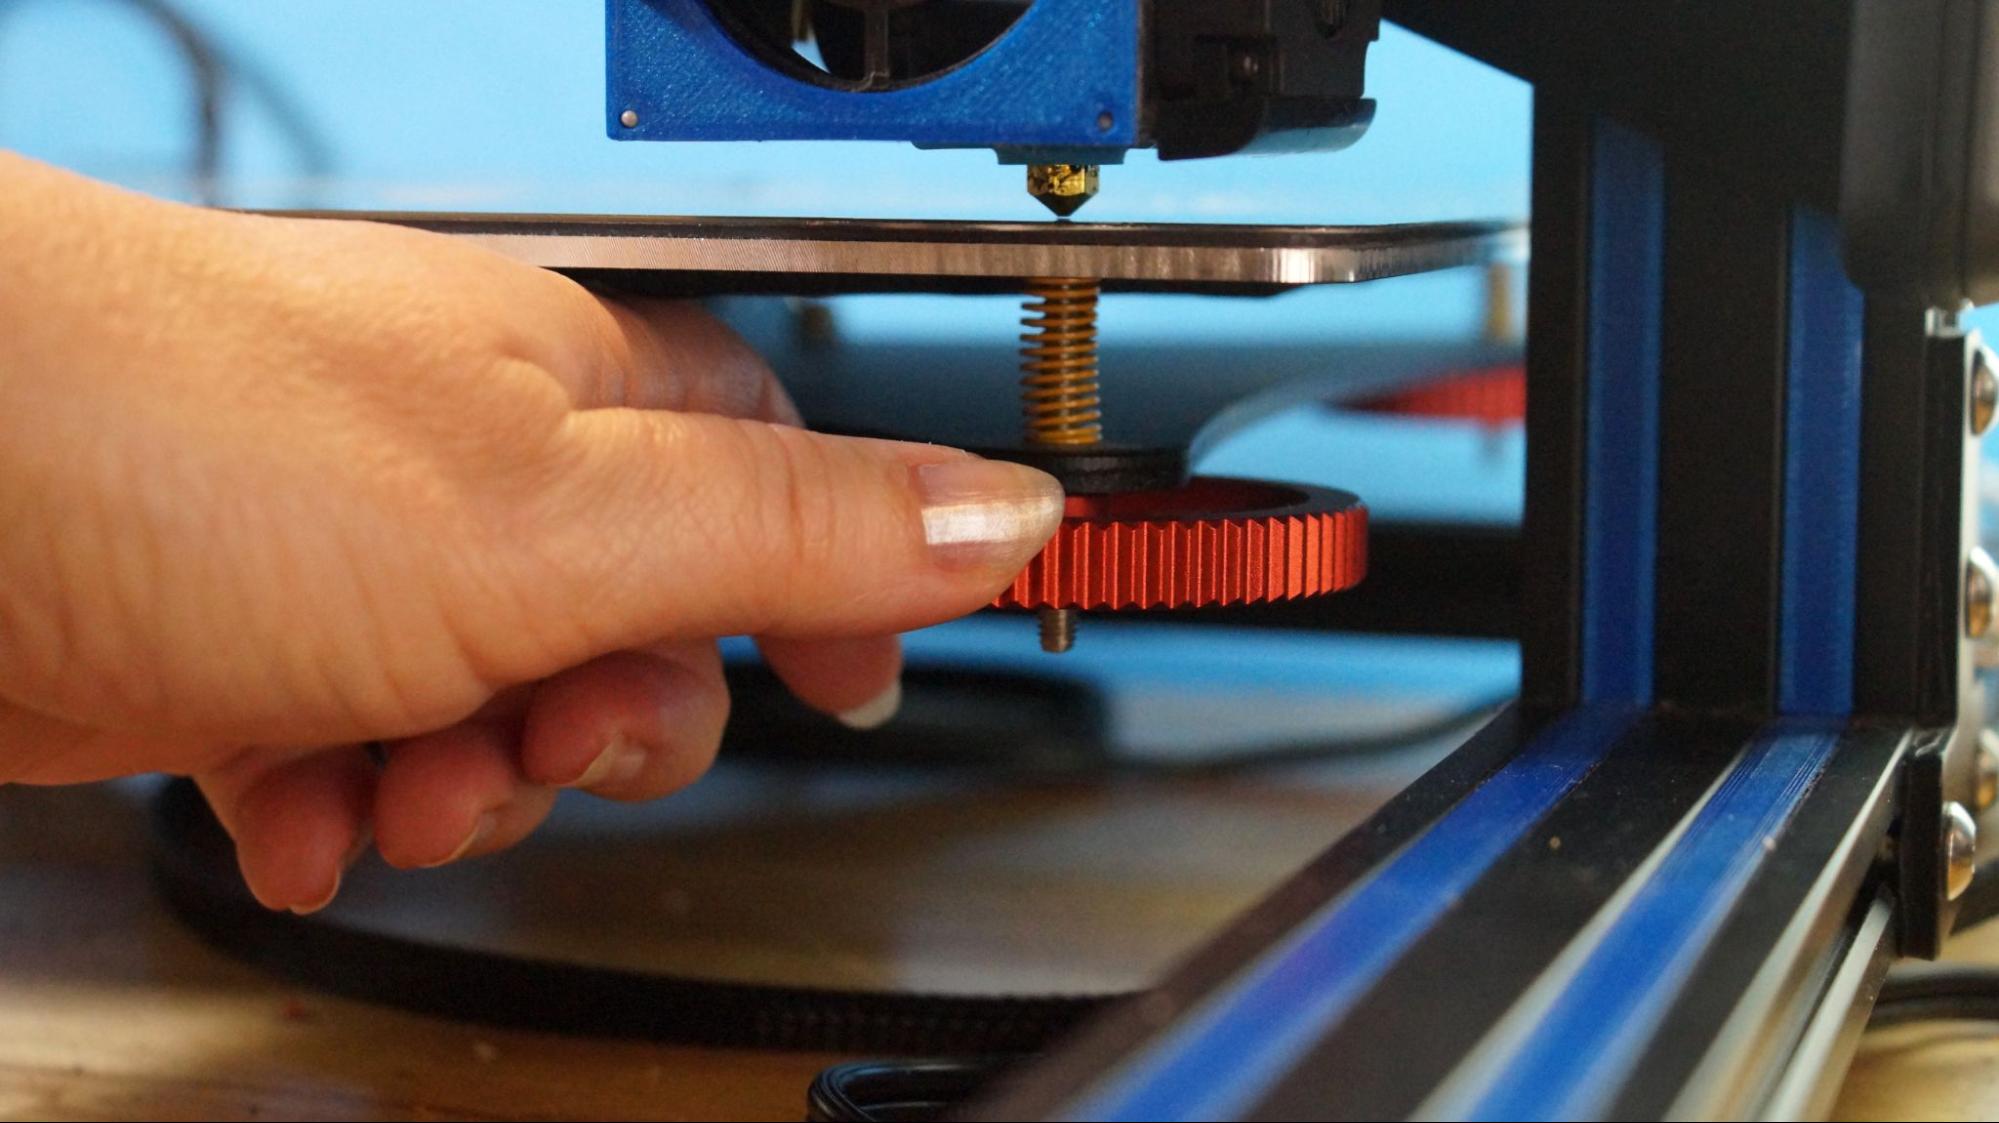 How to Manually Level a 3D Printer Bed | Tom's Hardware